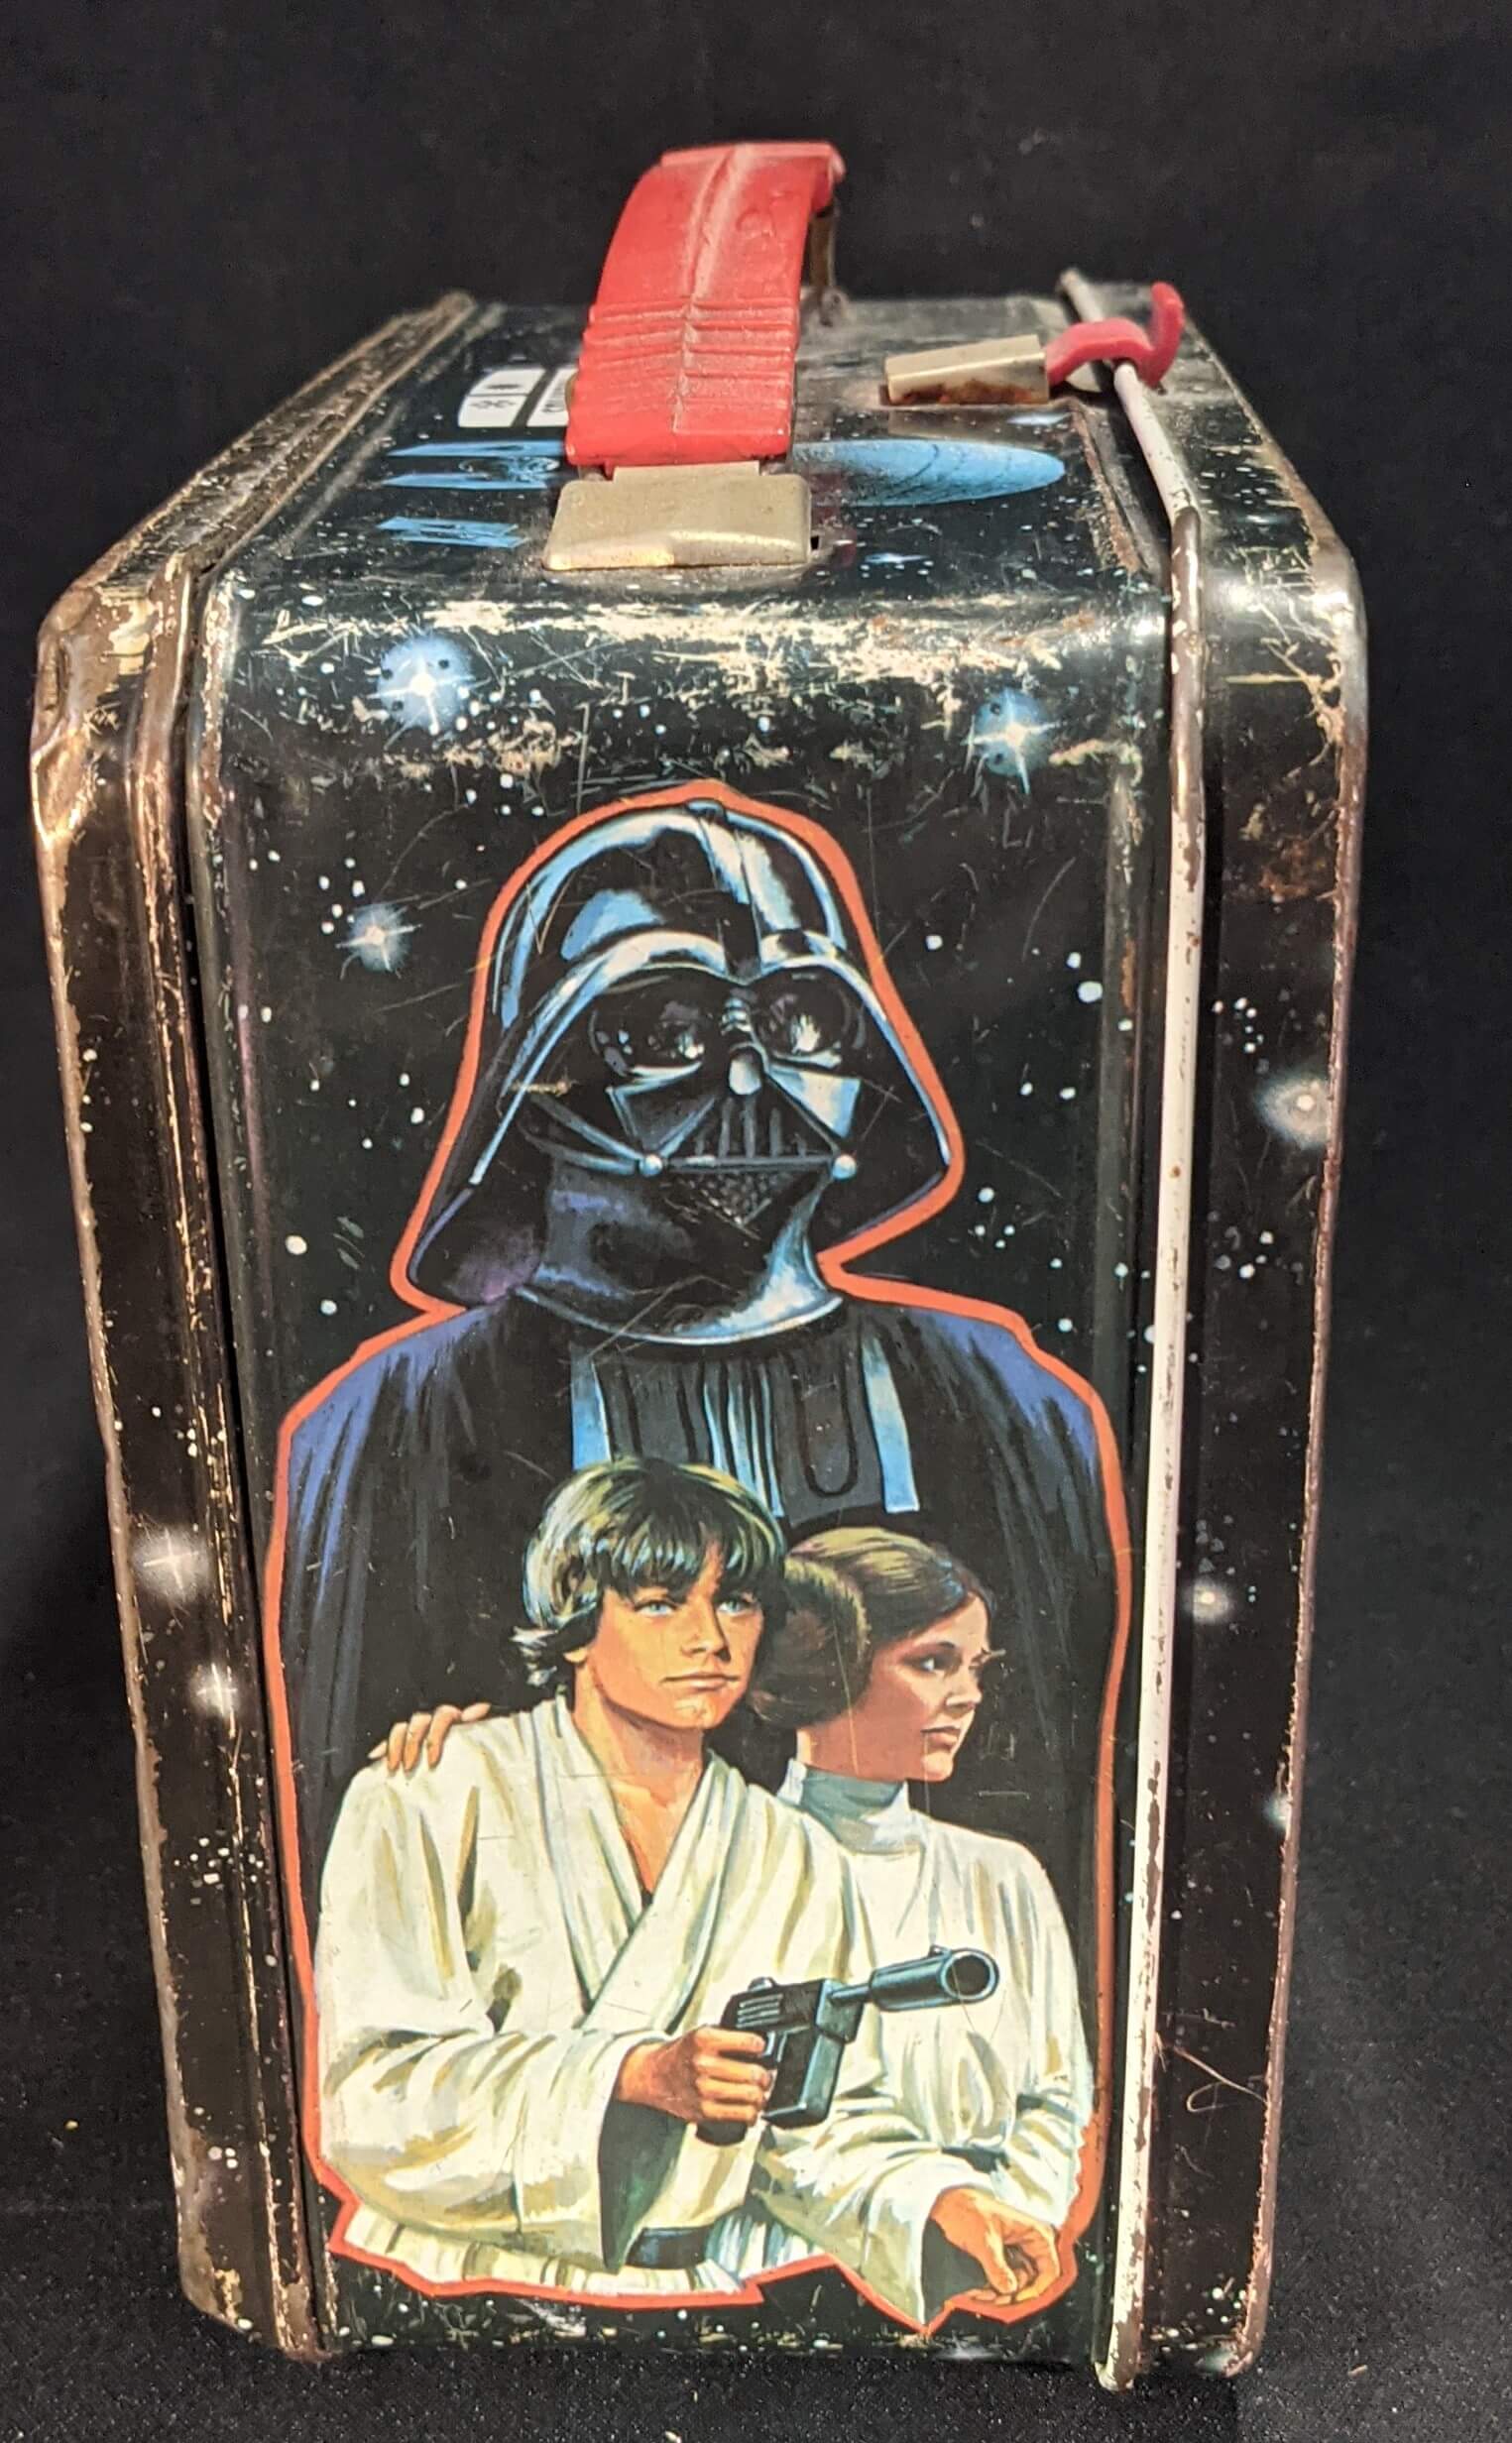 Thermos K43415006 Metal Lunch Box, Star Wars & H1015SWM4 16-Ounce